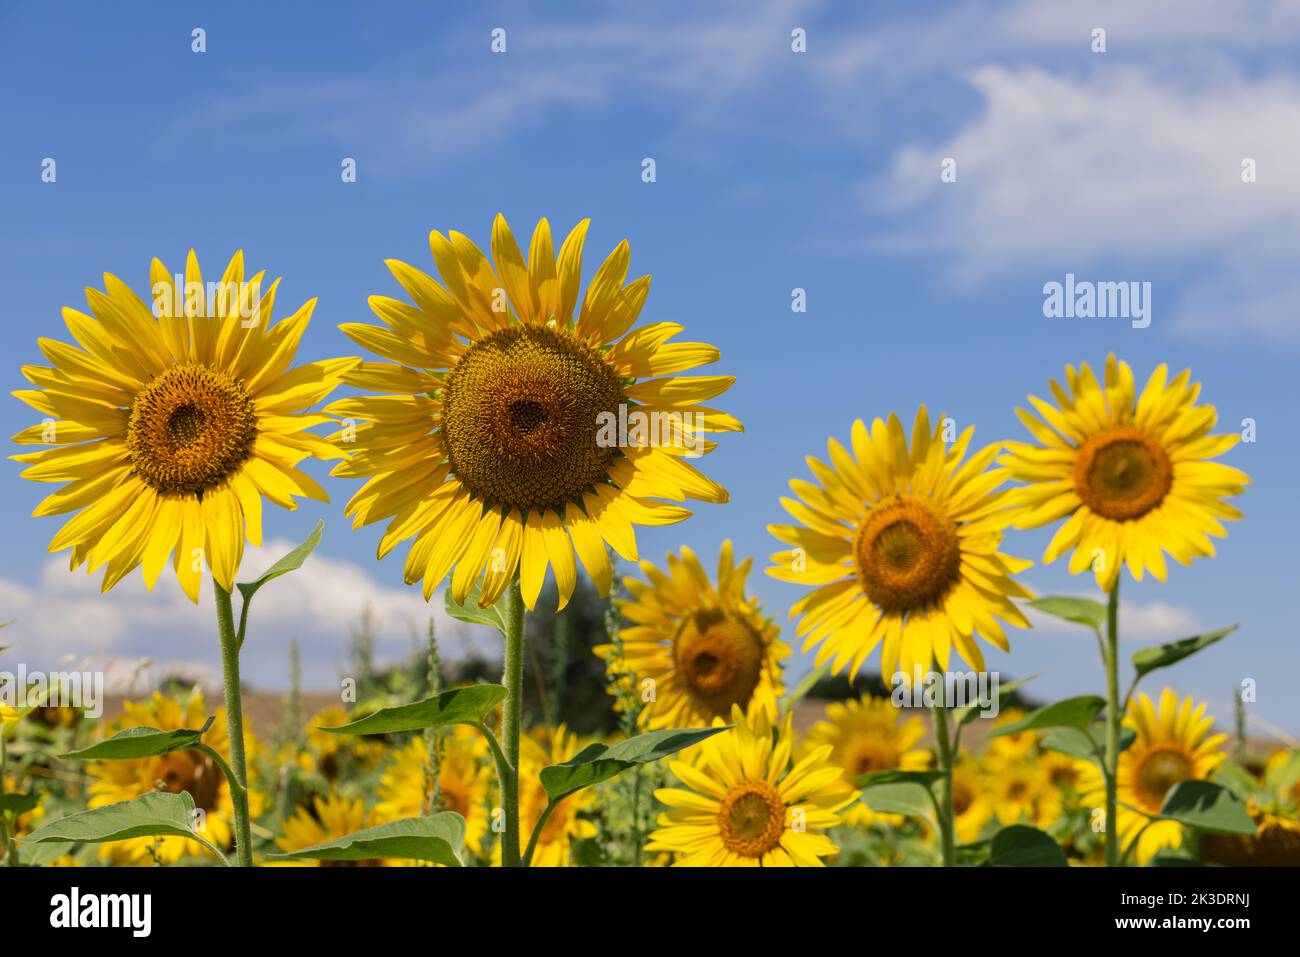 Most demonstrative example for botanists: several large sunflower (Helianthus annuus) inflorescences of varying maturity/ripeness, close up against a Stock Photo